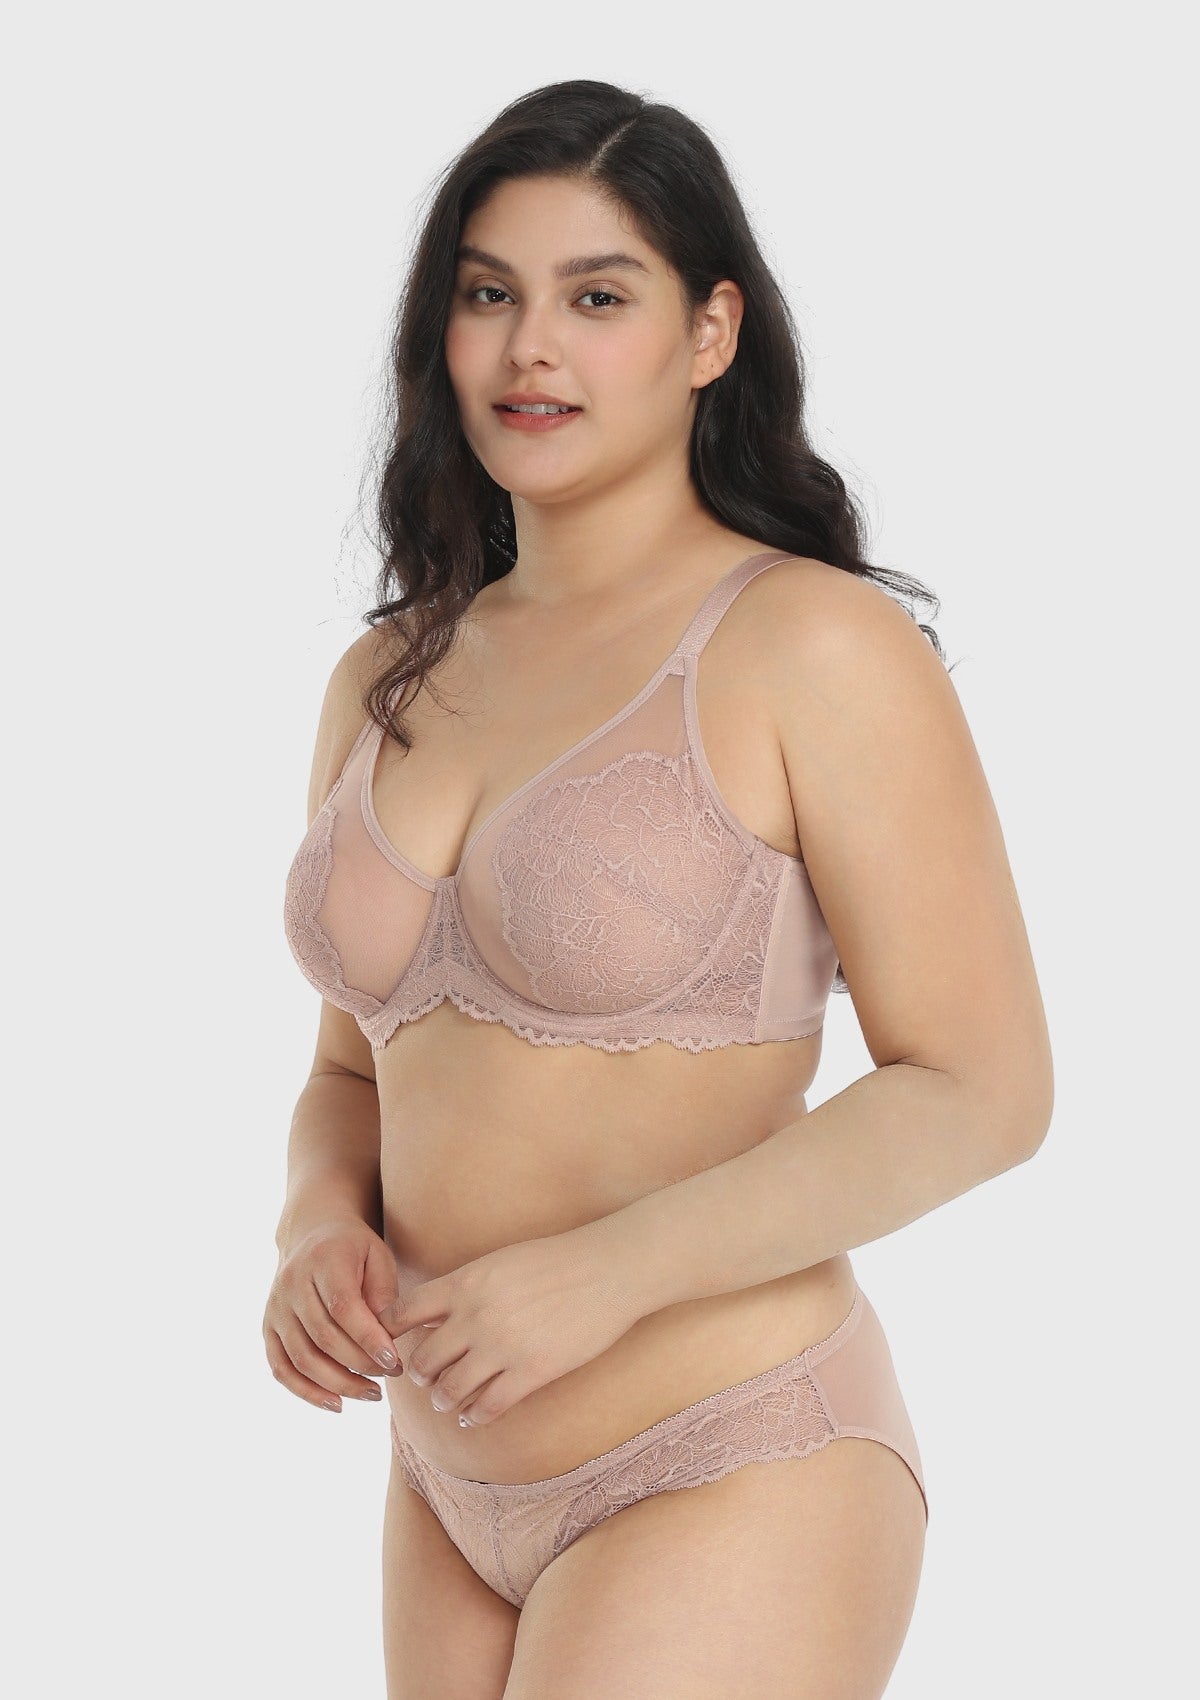 HSIA Blossom Plus Size Lace Bra - Wired, Unpadded, See-Through - Dark Pink / 38 / C